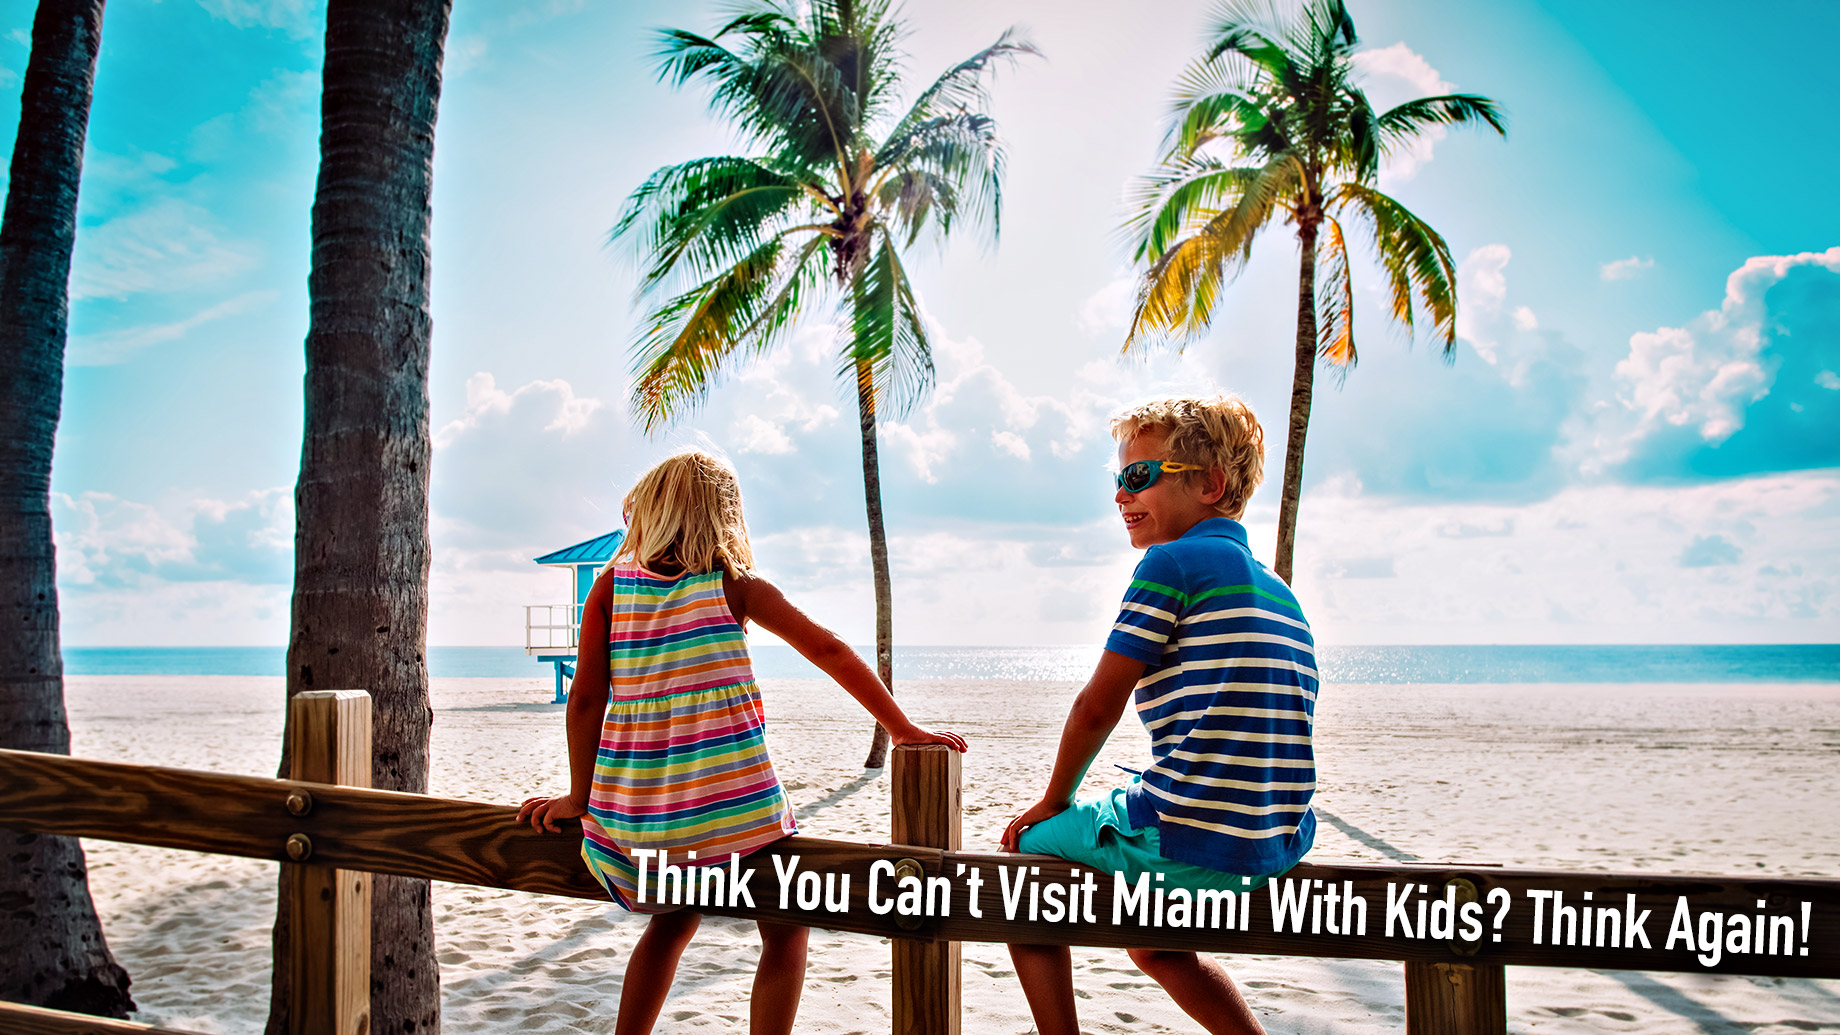 Think You Can’t Visit Miami With Kids? Think Again!